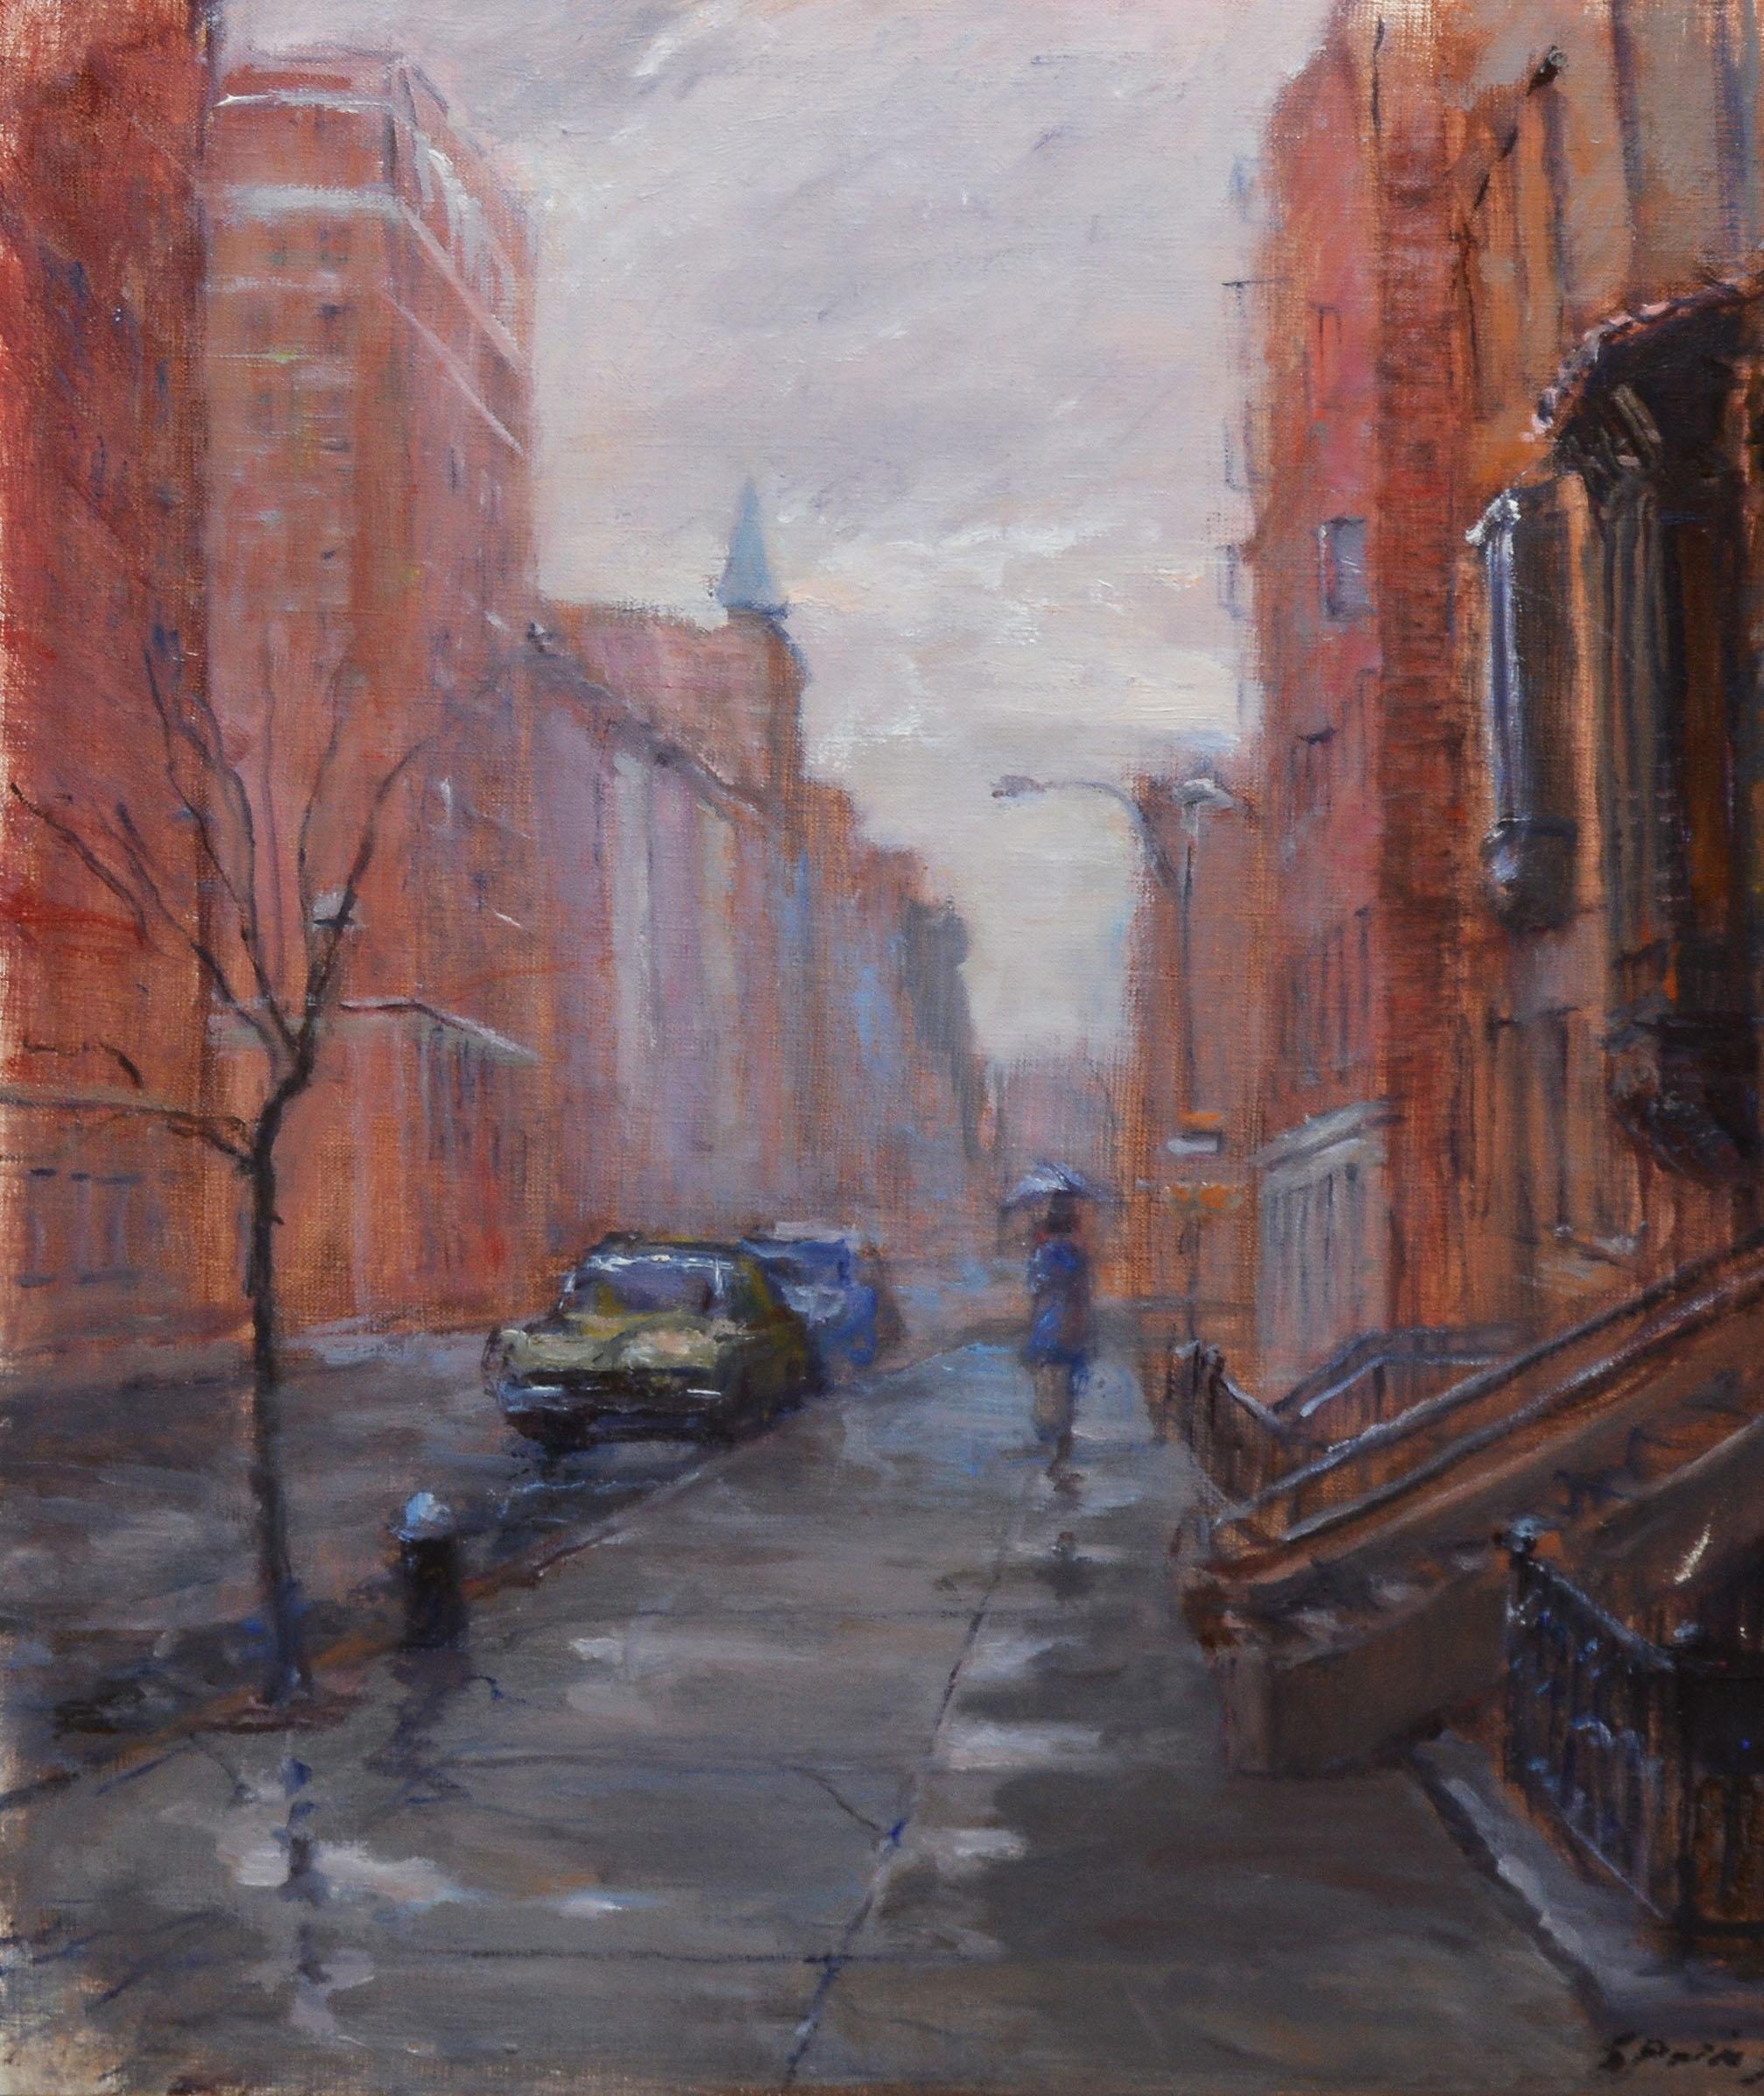 Rainy Day in the Village, Vintage Painting of New York City, Anthony Springer 1